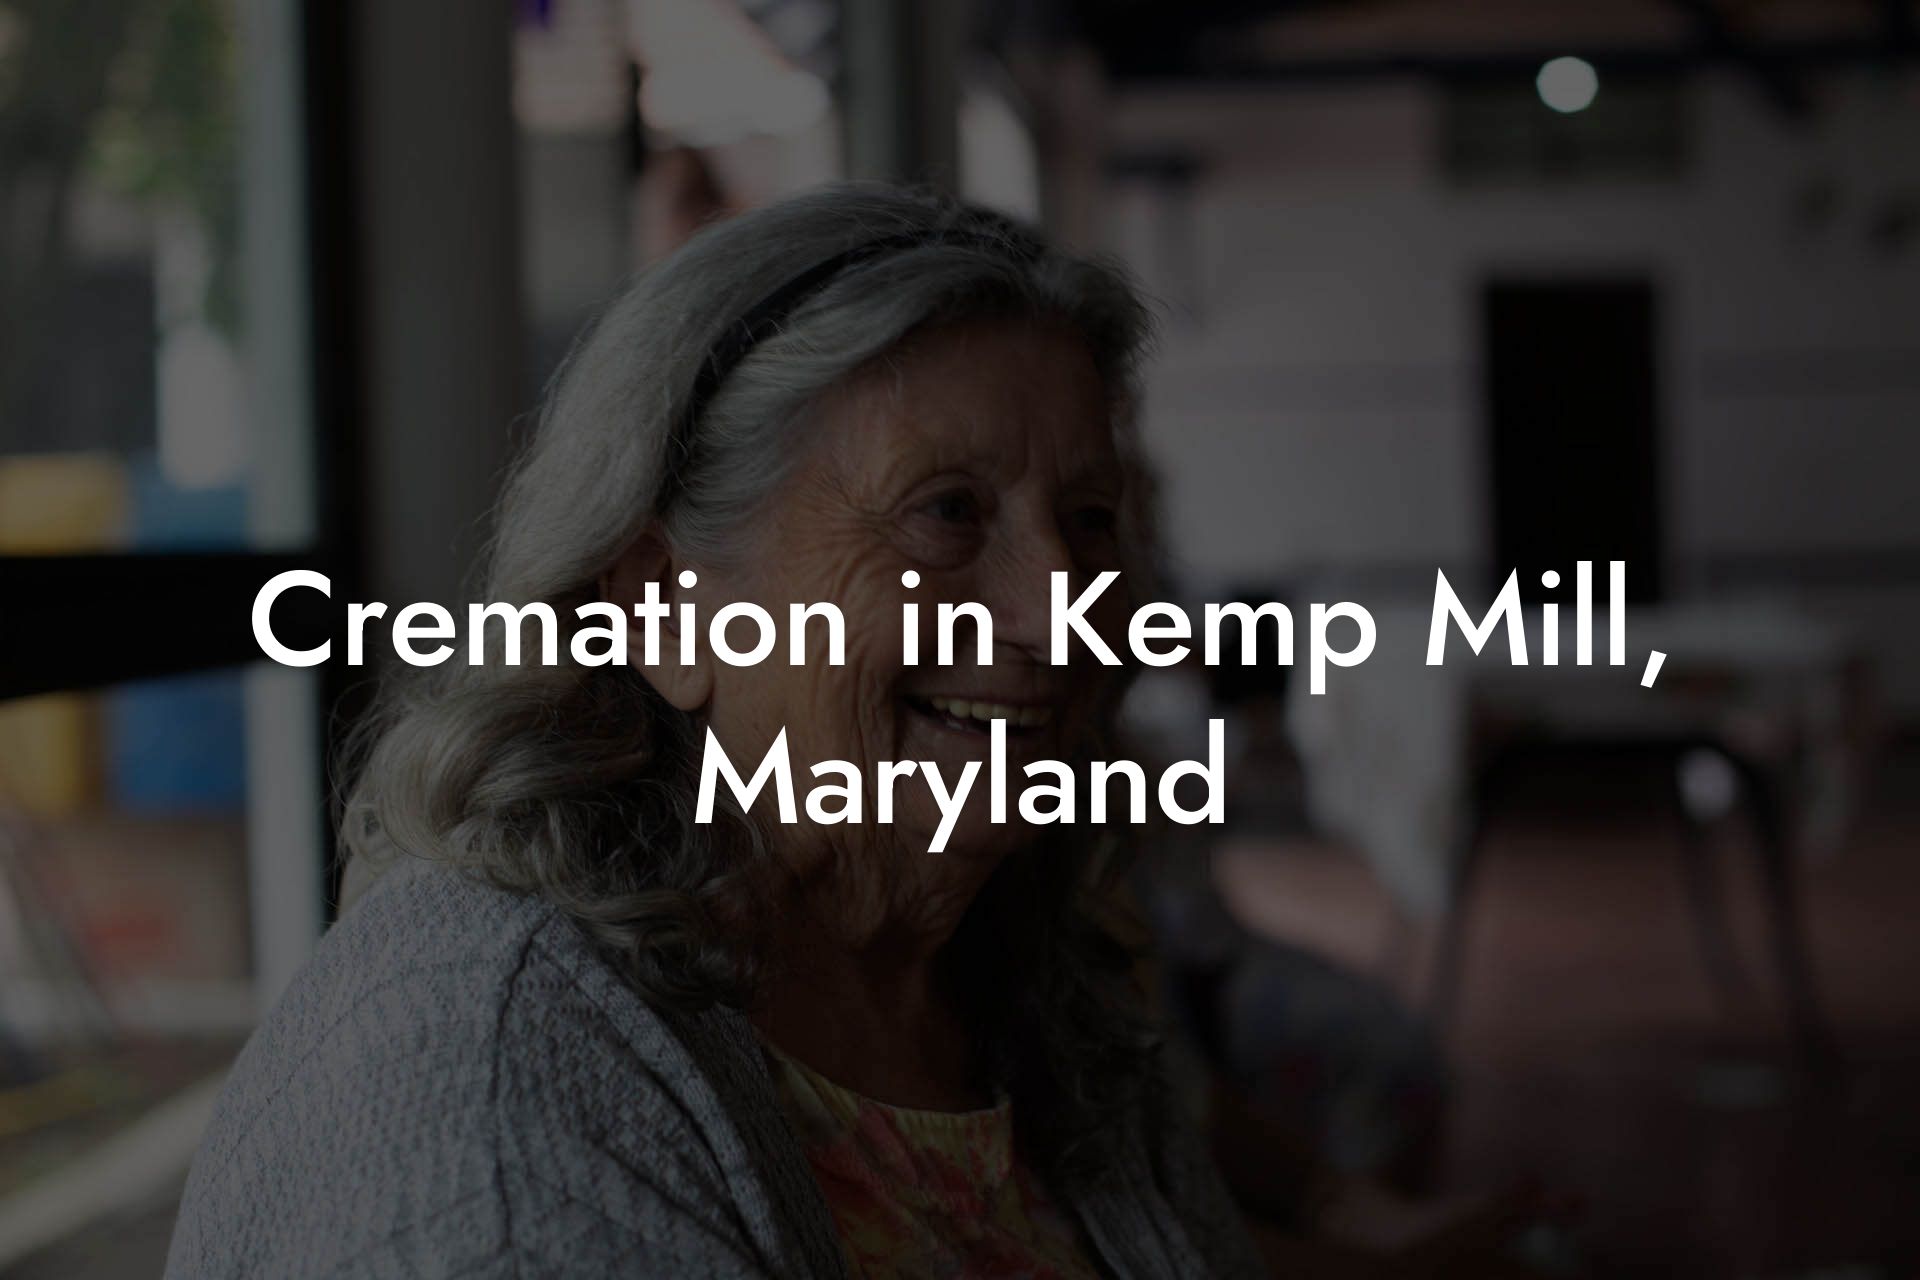 Cremation in Kemp Mill, Maryland